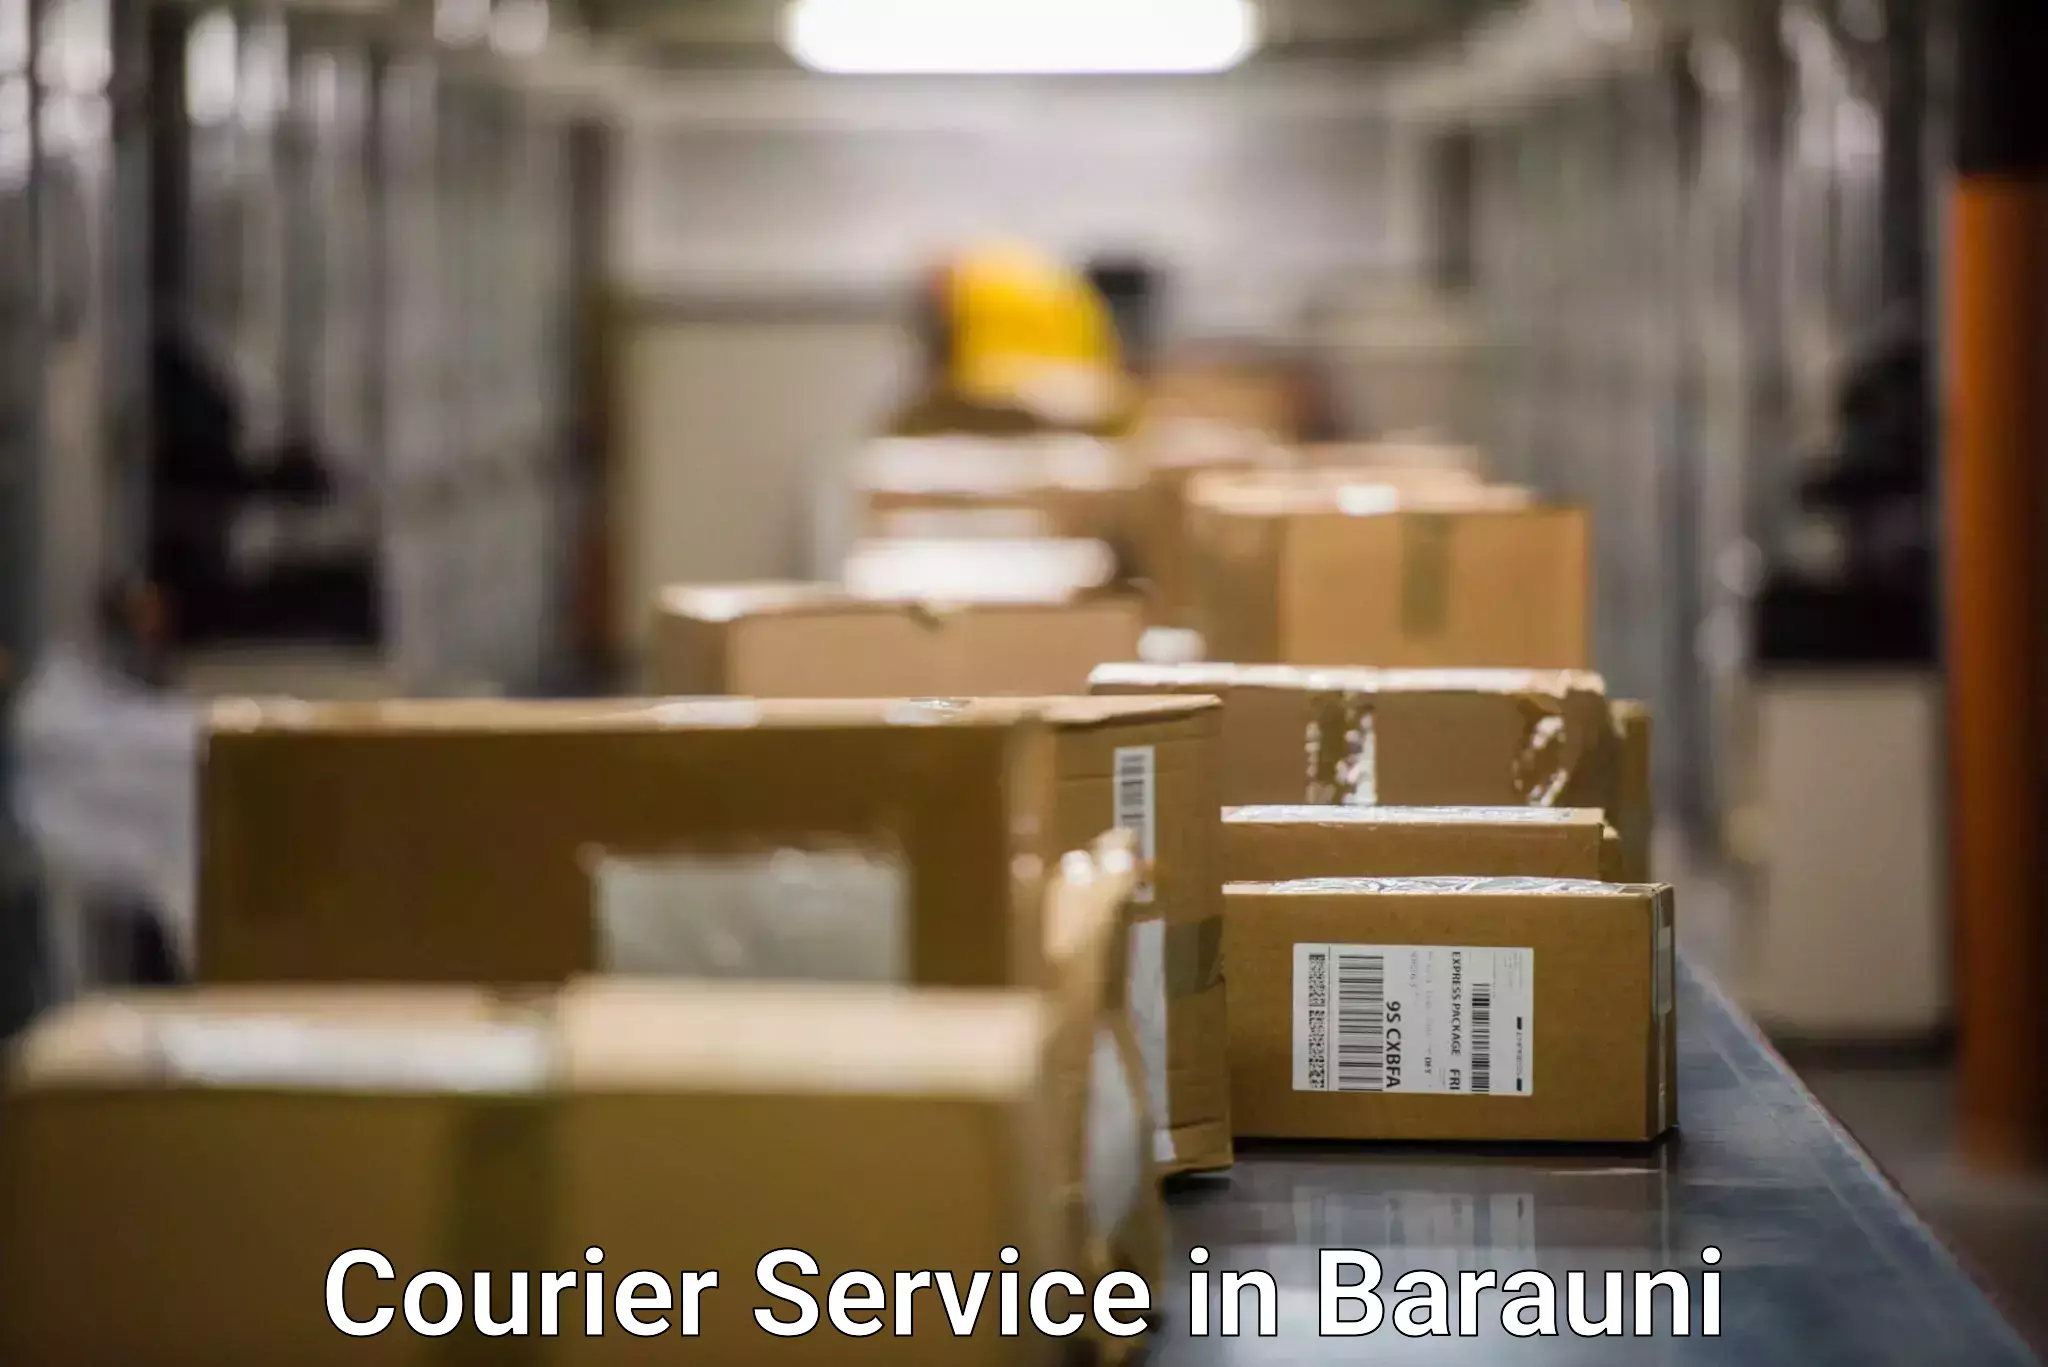 Multi-package shipping in Barauni